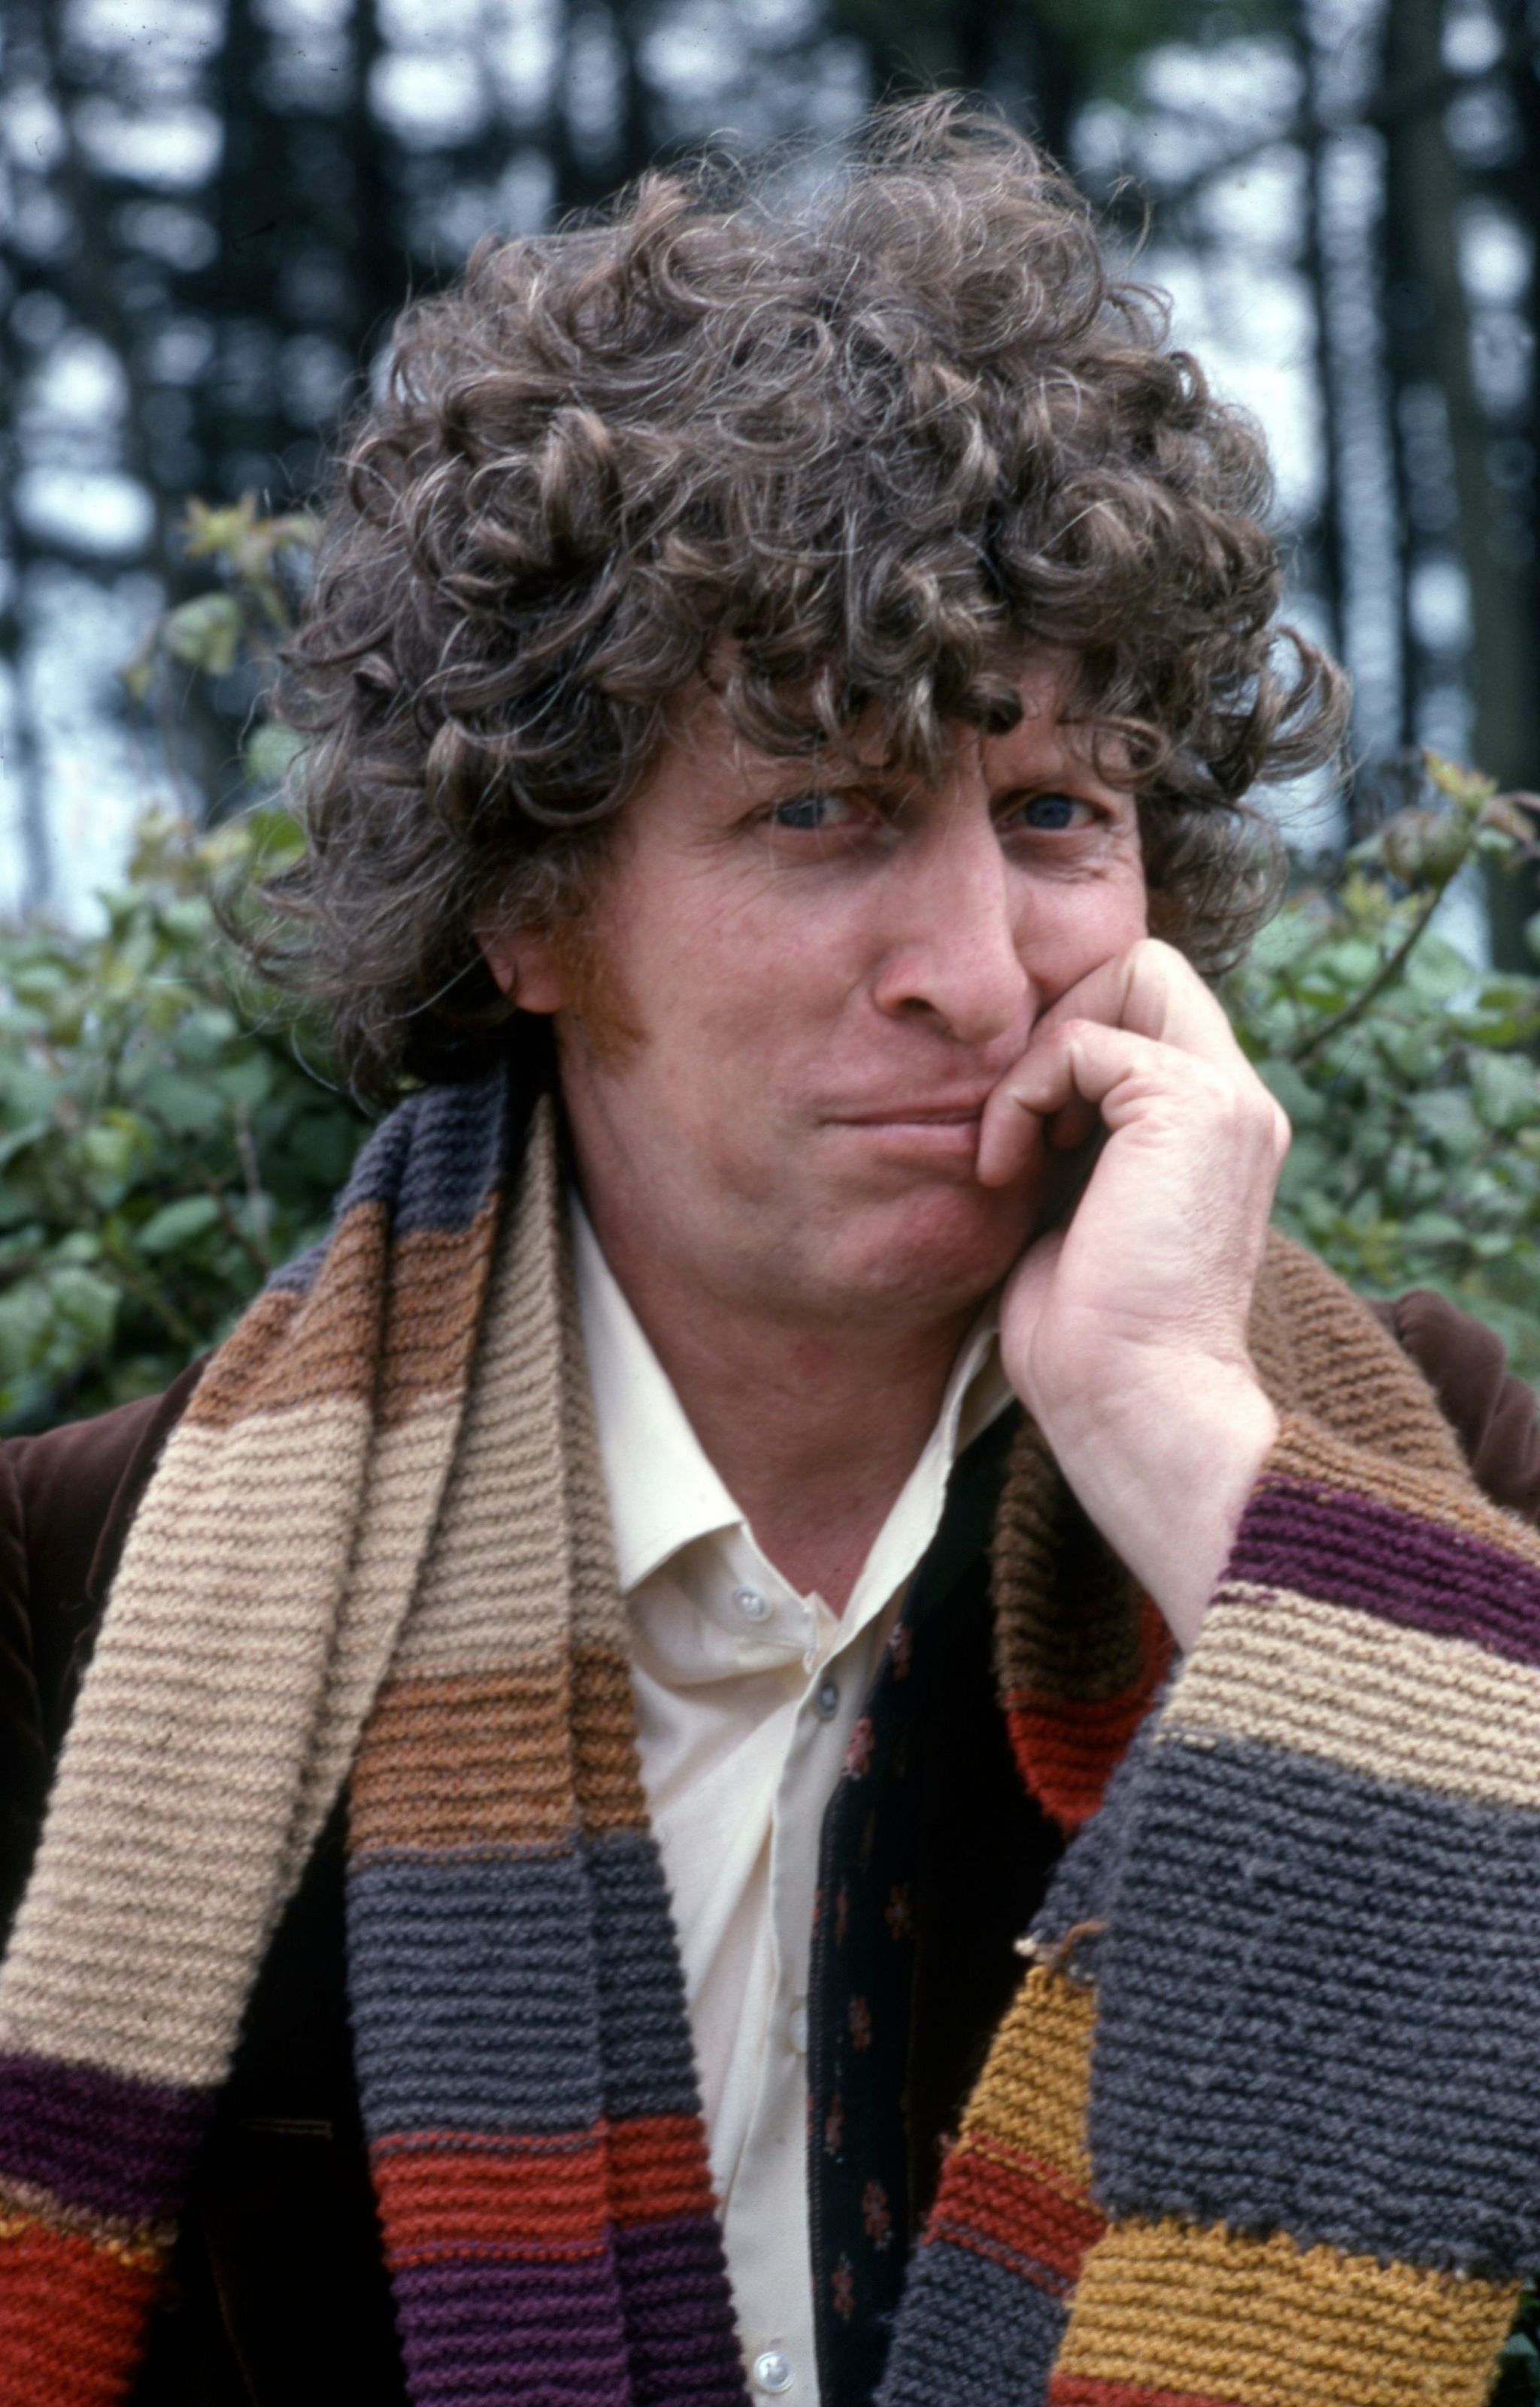 Tom Baker in costume as the 4th Doctor, looking at to camera with the beginning of a smile